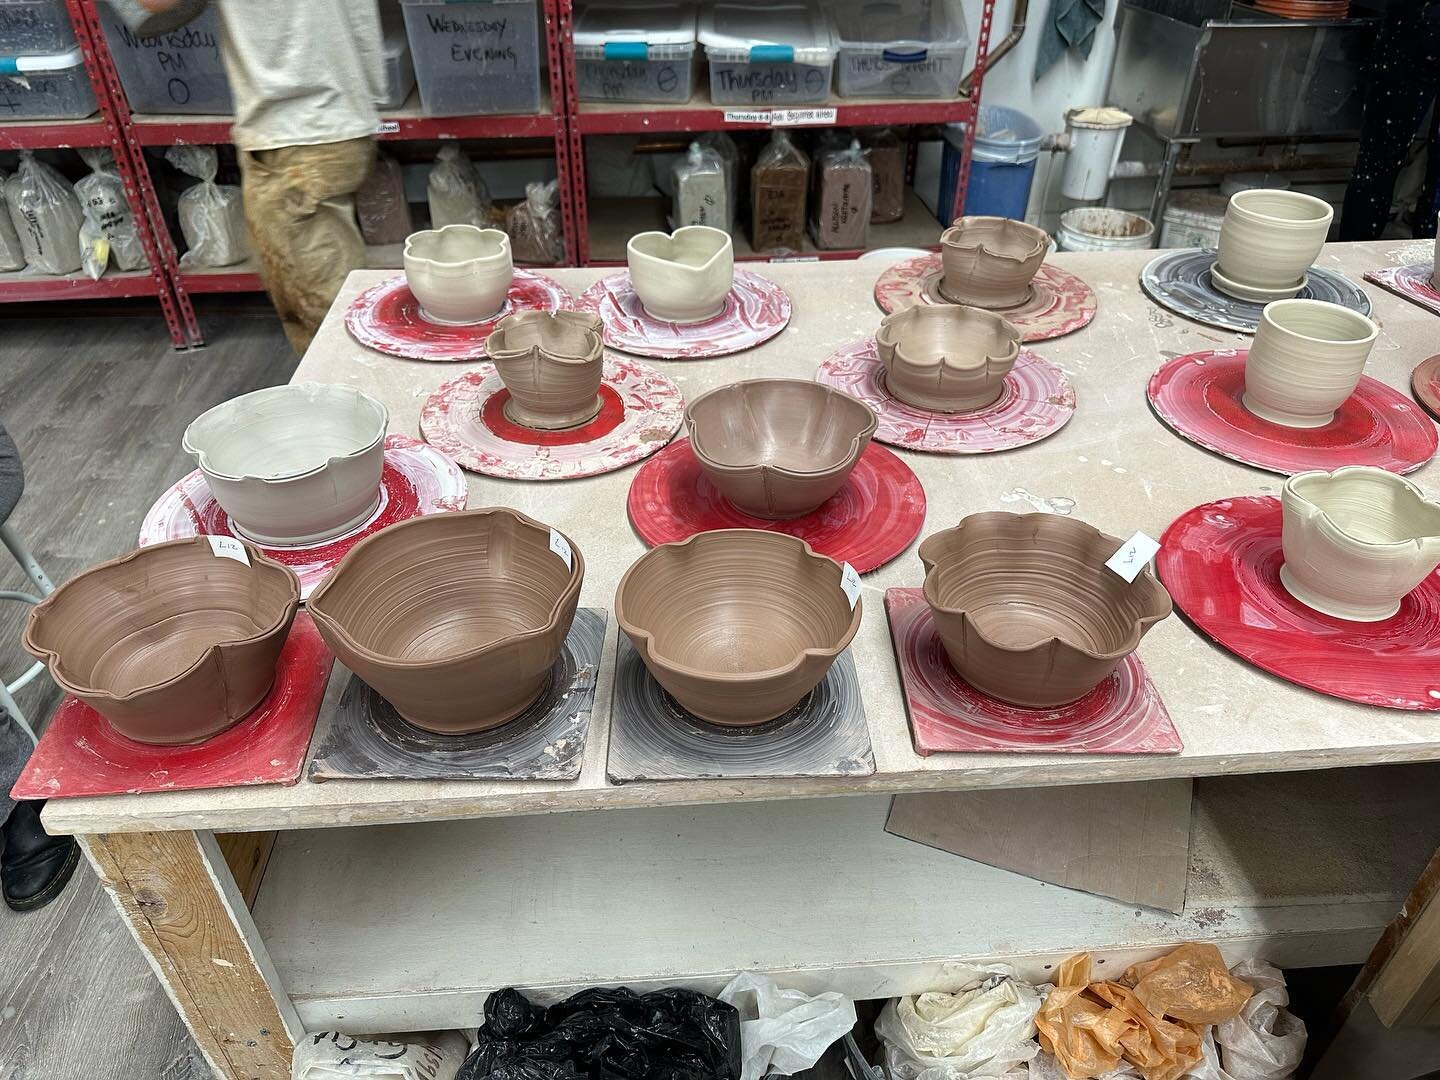 Check out what our Advanced Beginner &lsquo;Wheel Thrown and Altered&rsquo; class is up to this week! Beautiful bowls in progress from Liz&rsquo;s rockstar Wednesday night students. 

#wheelthrownpottery #easthamptonclay #easthamptonclaystudents #its